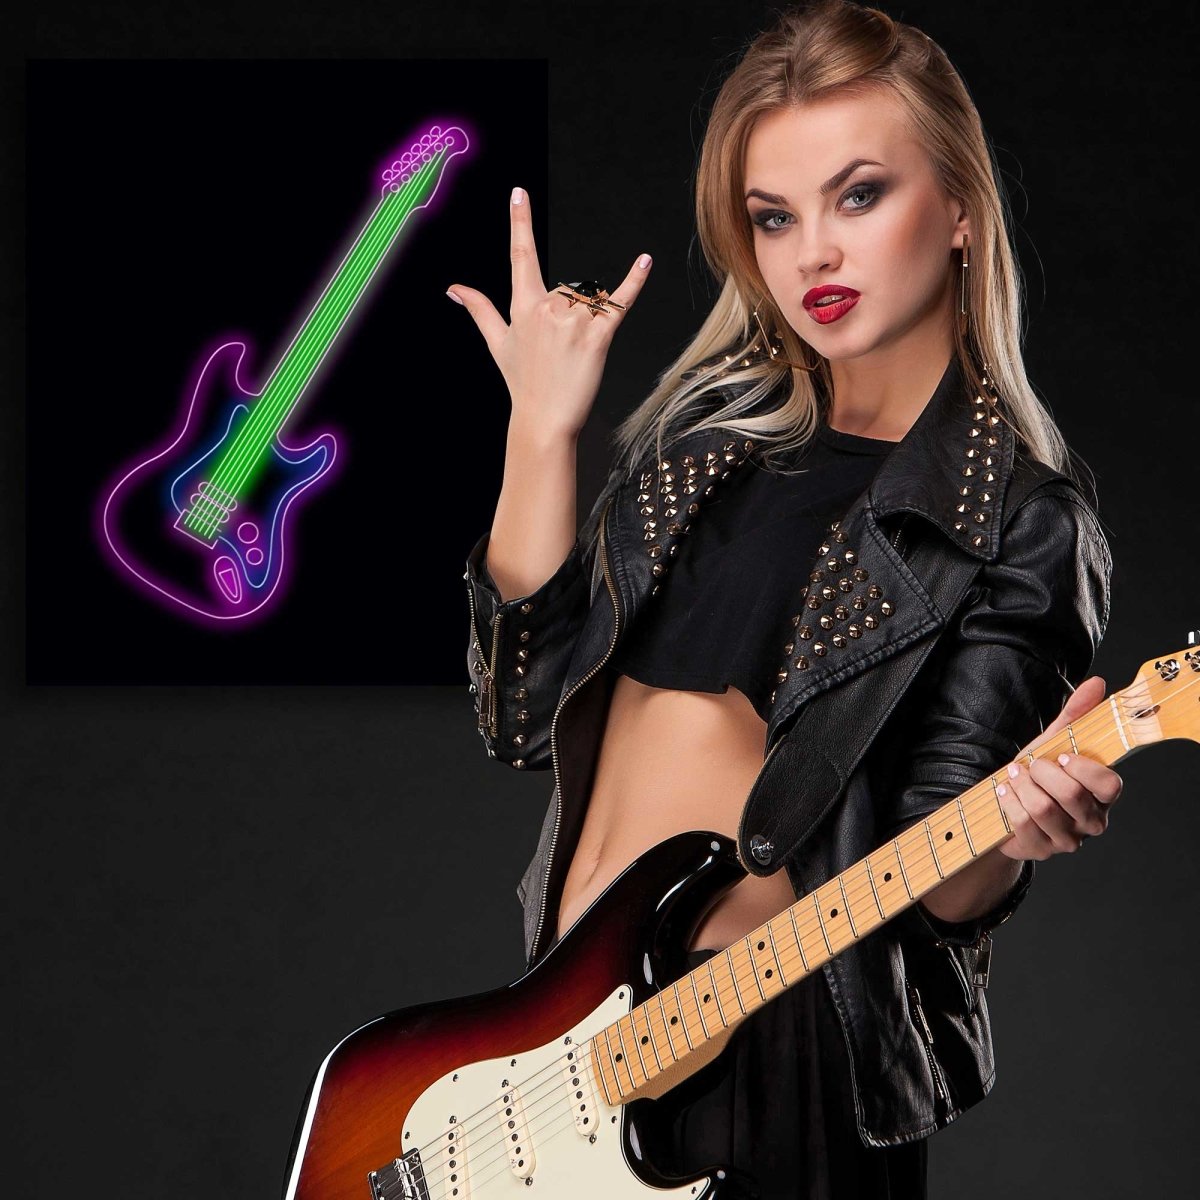 Personalised LED Neon Sign ELECTRIC GUITAR - madaboutneon